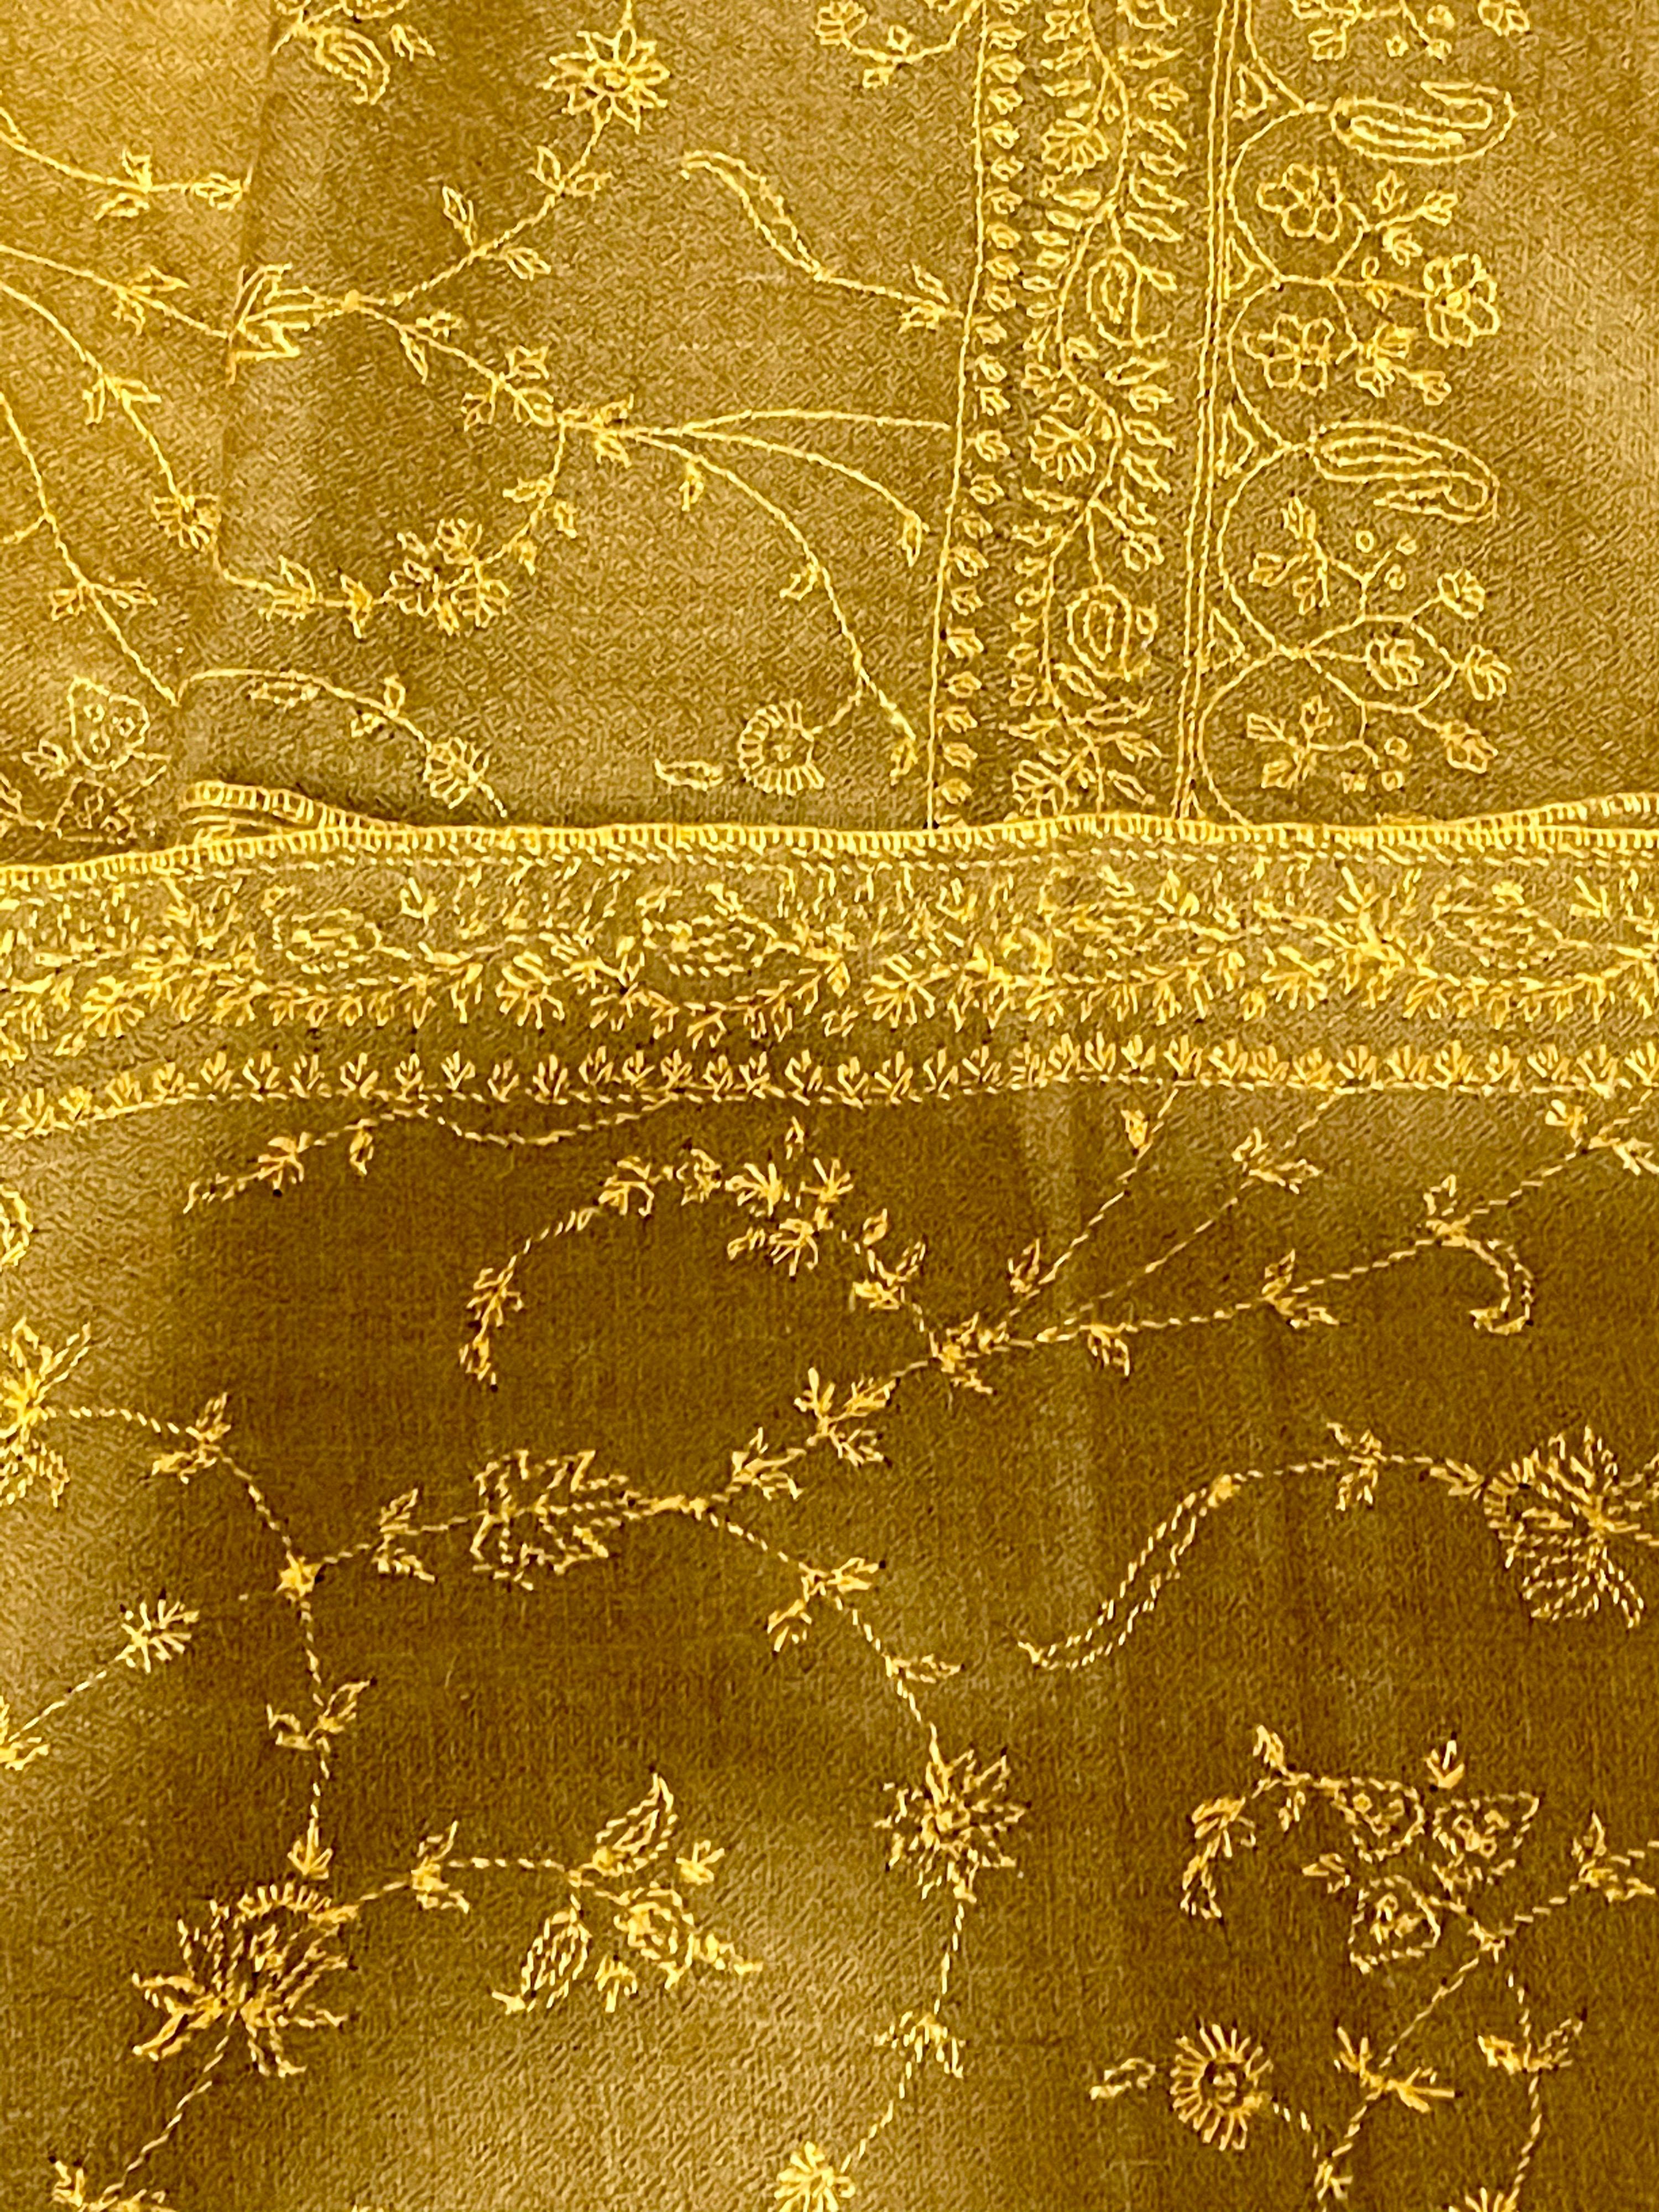 Hand Embroidered 100% Cashmere Pashmina Shawl Golden Brown Made in Kashmir  1